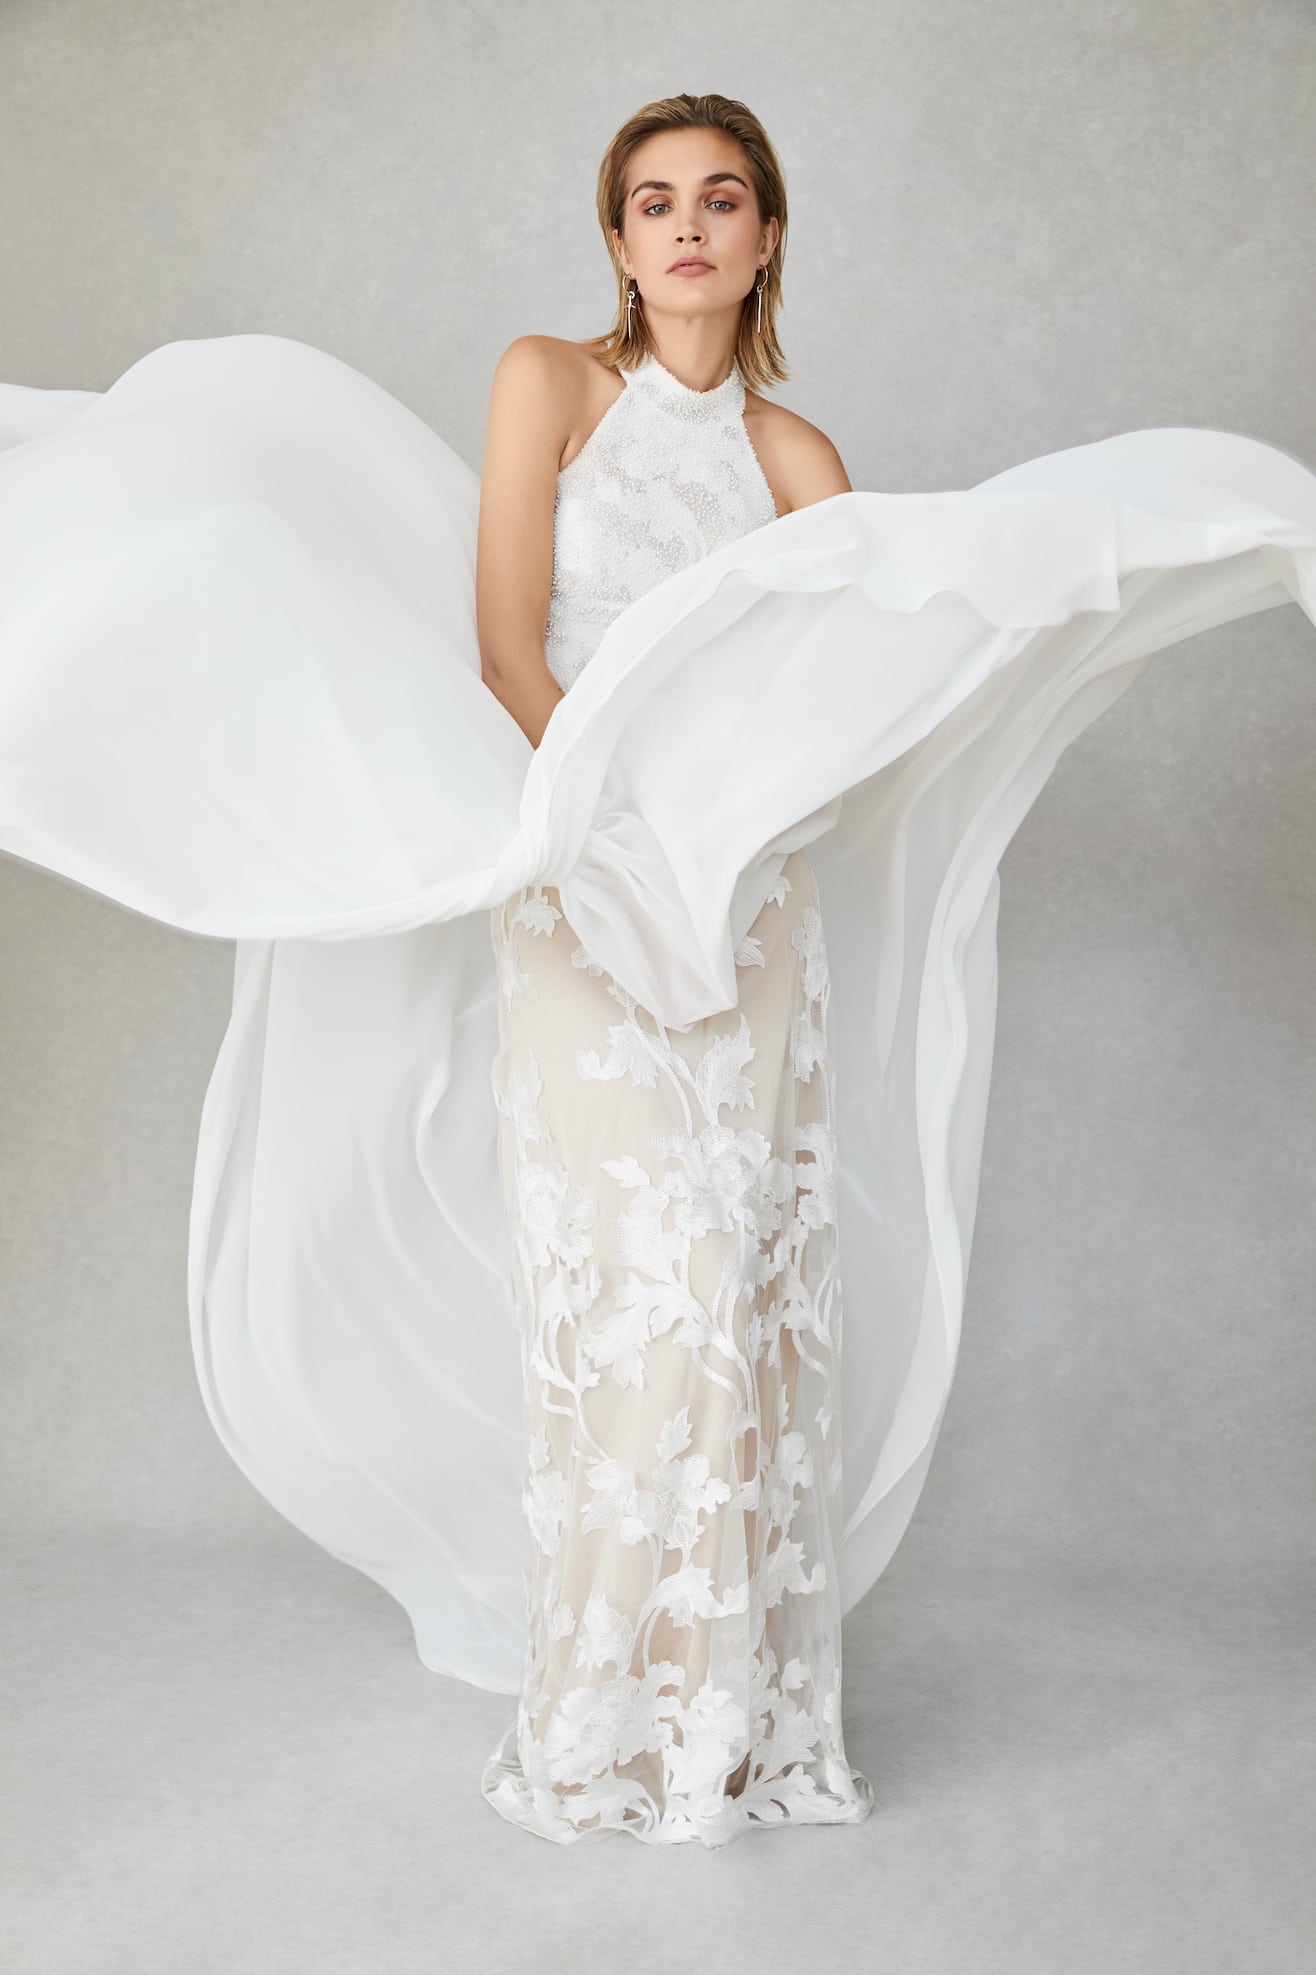 A woman wears a halter neck white wedding dress with a gauzy overlay on top of a sheer dress with botanical style appliqués from Our Story Bridal. Her top overlay skirt billows around her 